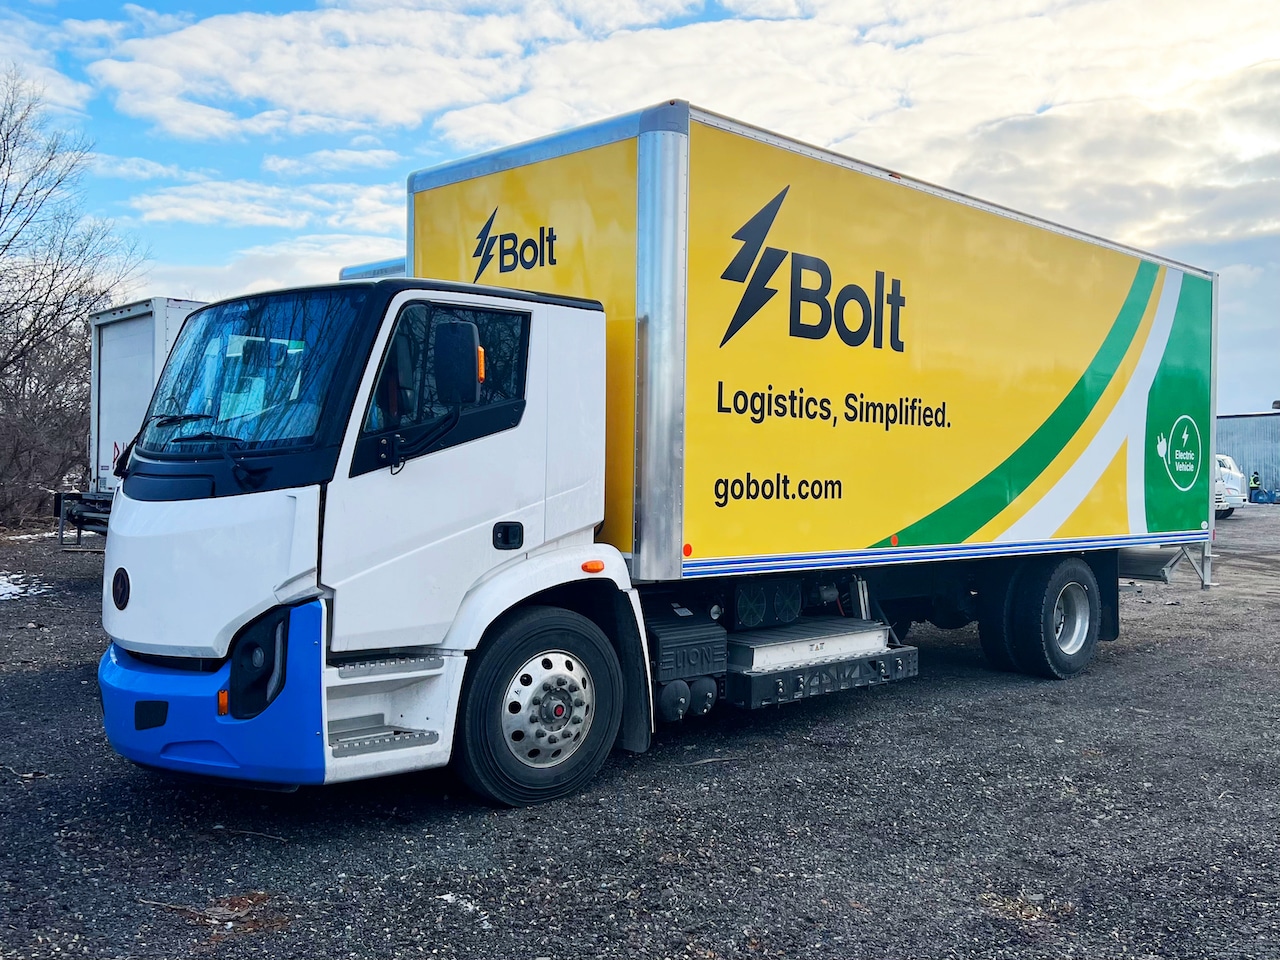 Bolt Logistics and IKEA Canada Join Forces to Deploy One of Canada’s Largest Zero Emission Vehicle Fleets